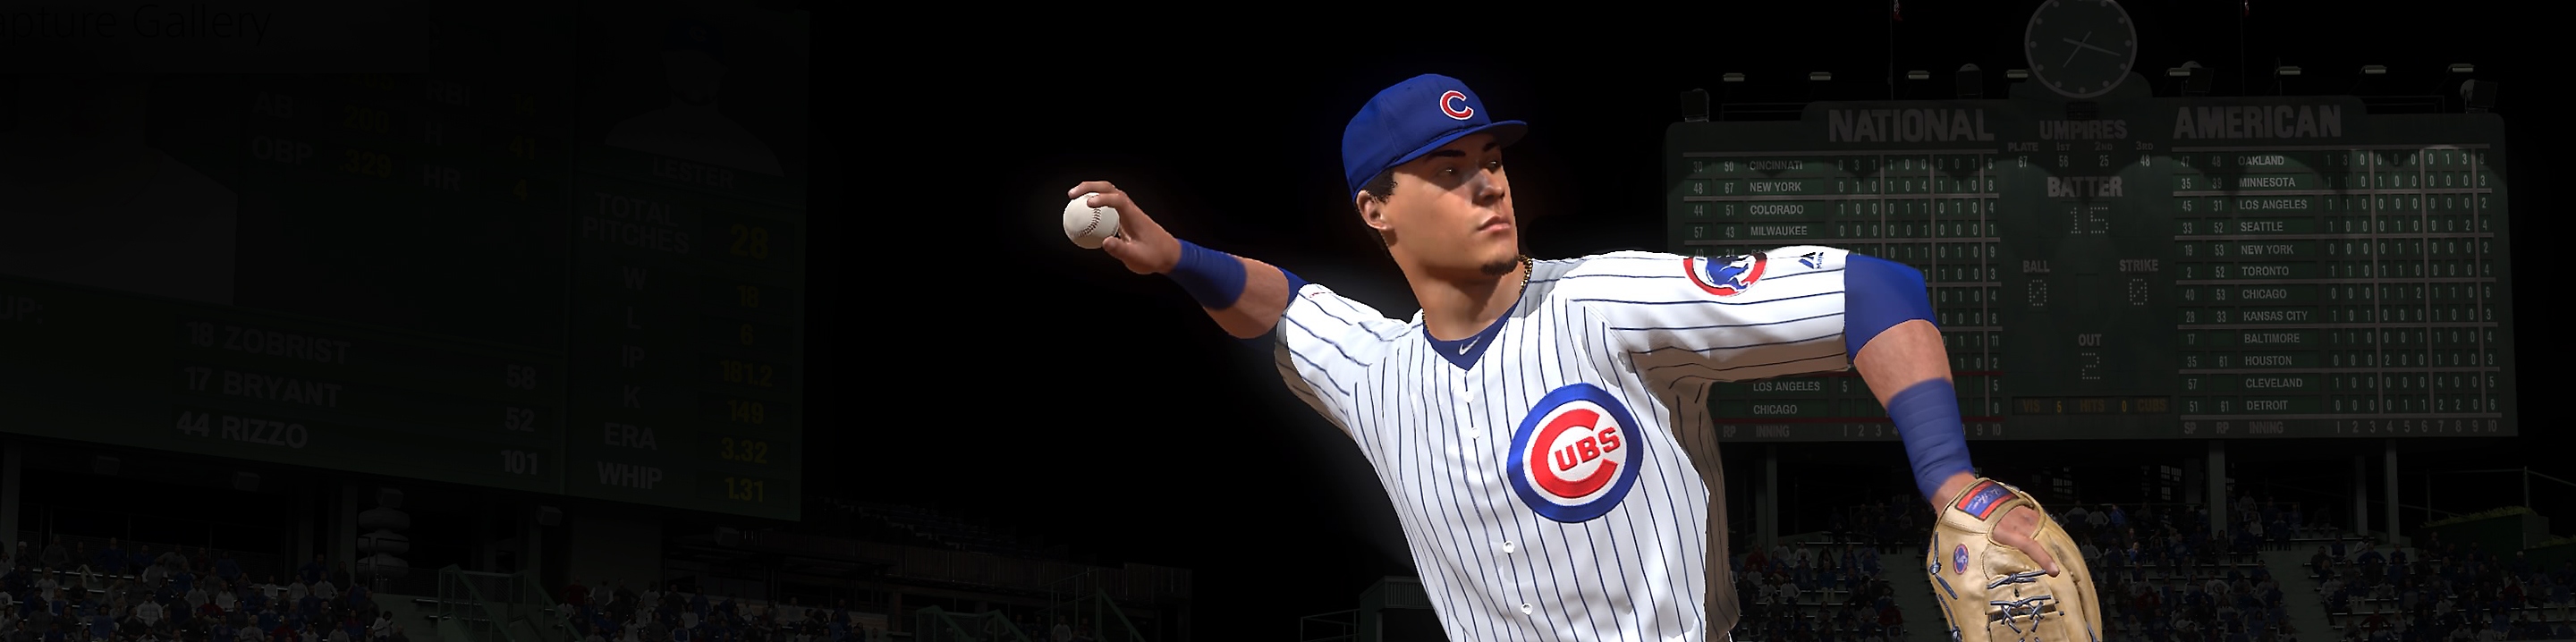 mlb the show 20 achtergrond